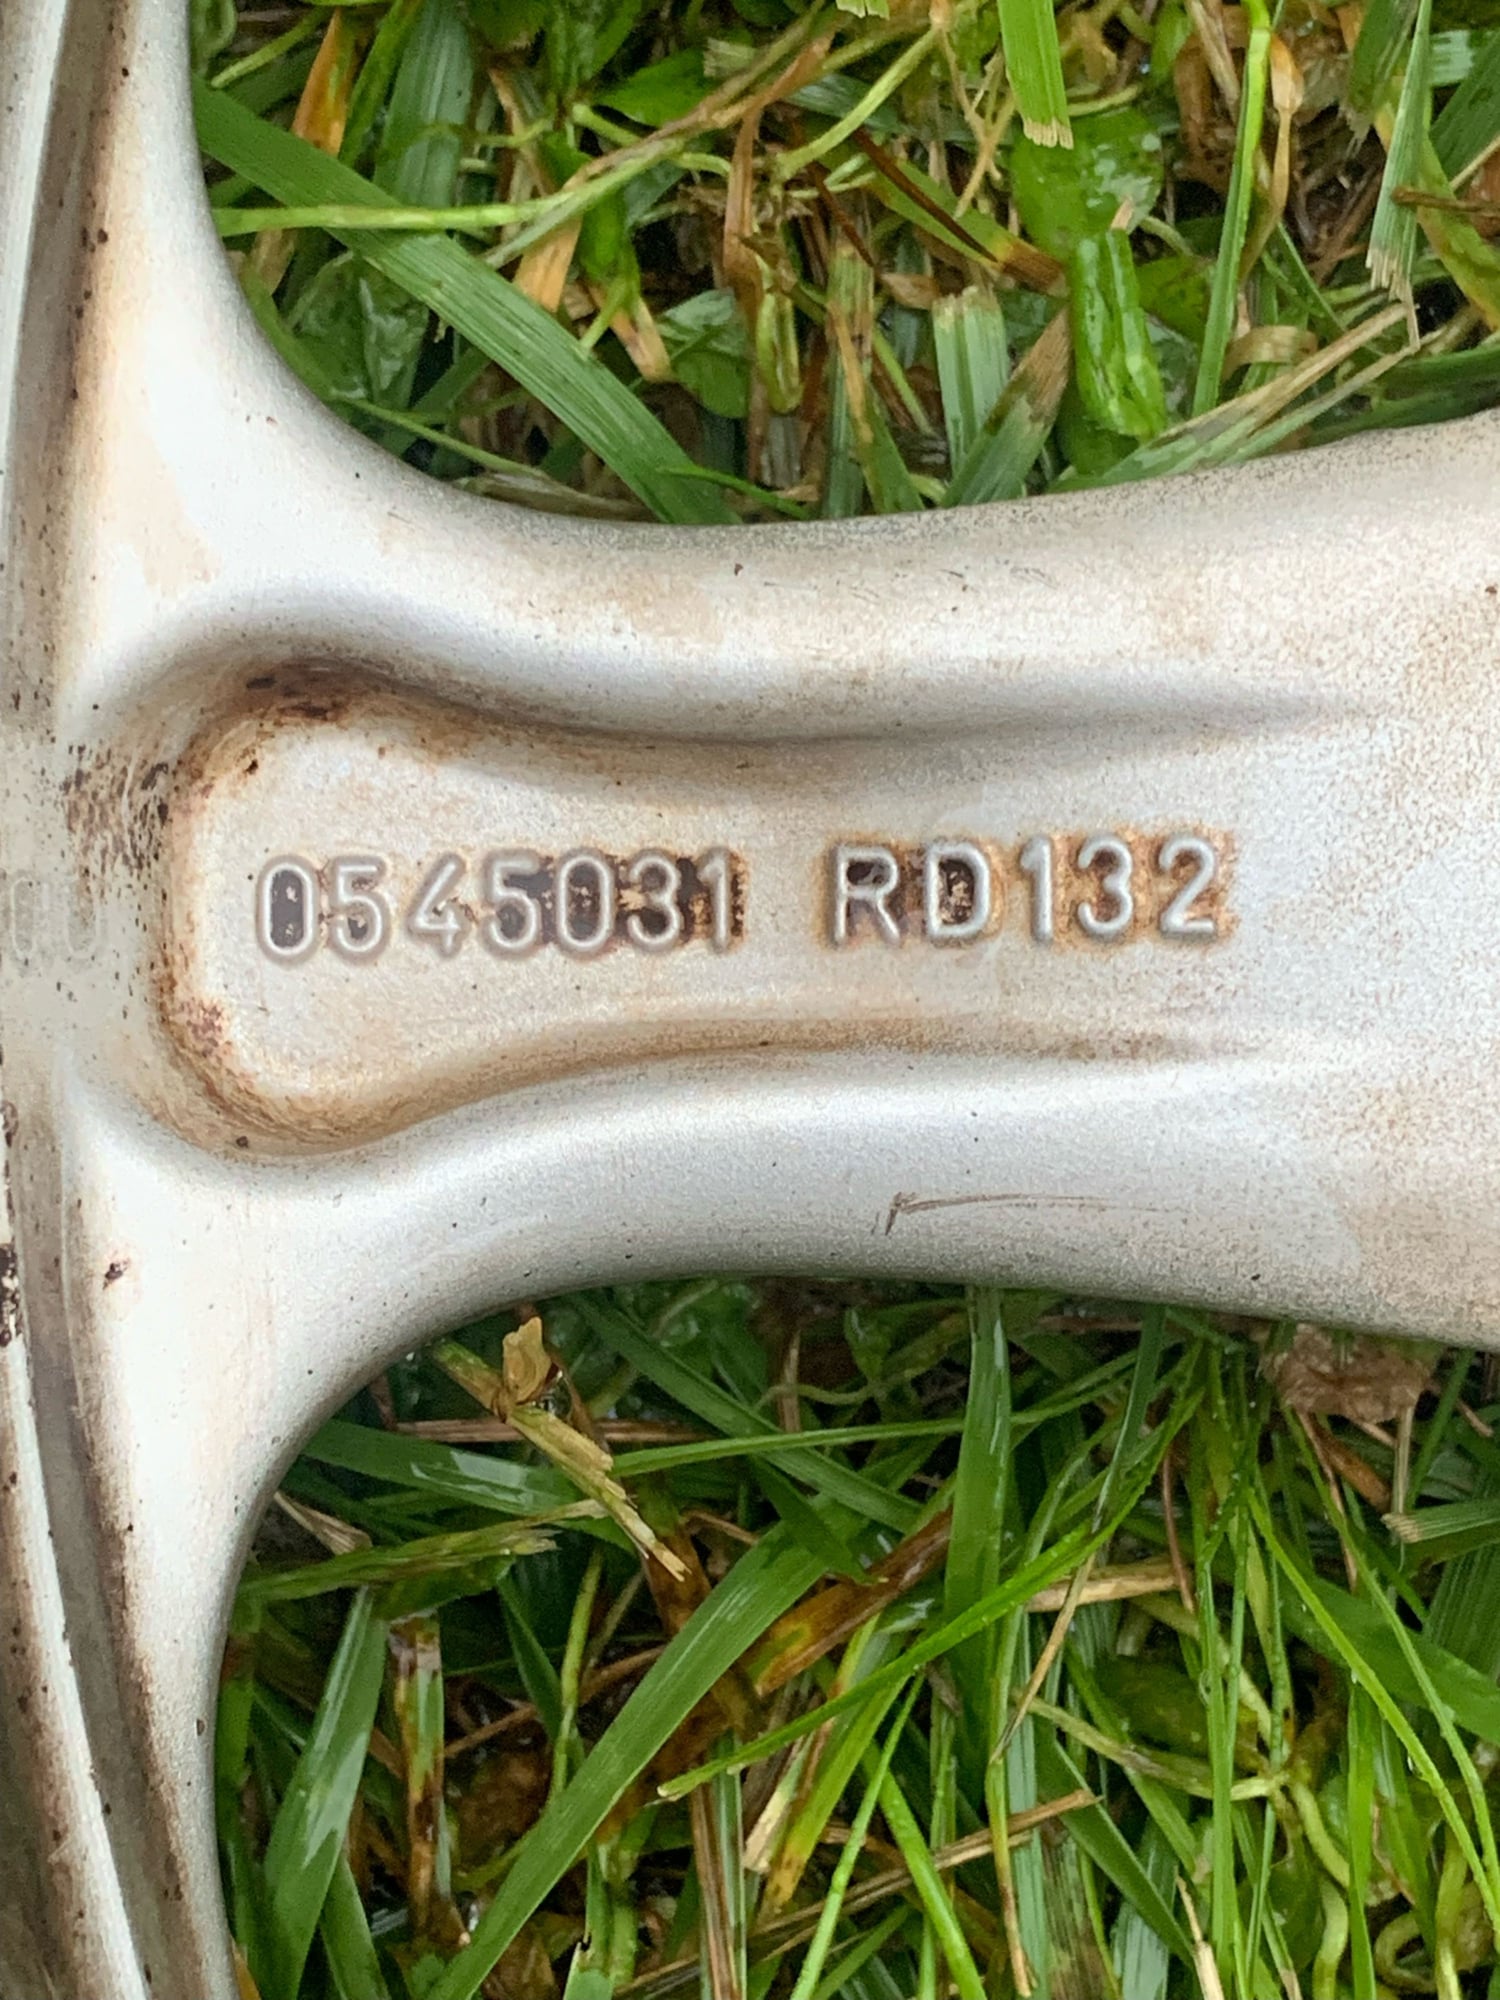 Wheels and Tires/Axles - MY02 18x8/10 - Used - 1999 to 2017 Porsche 911 - West Chester, PA 19380, United States